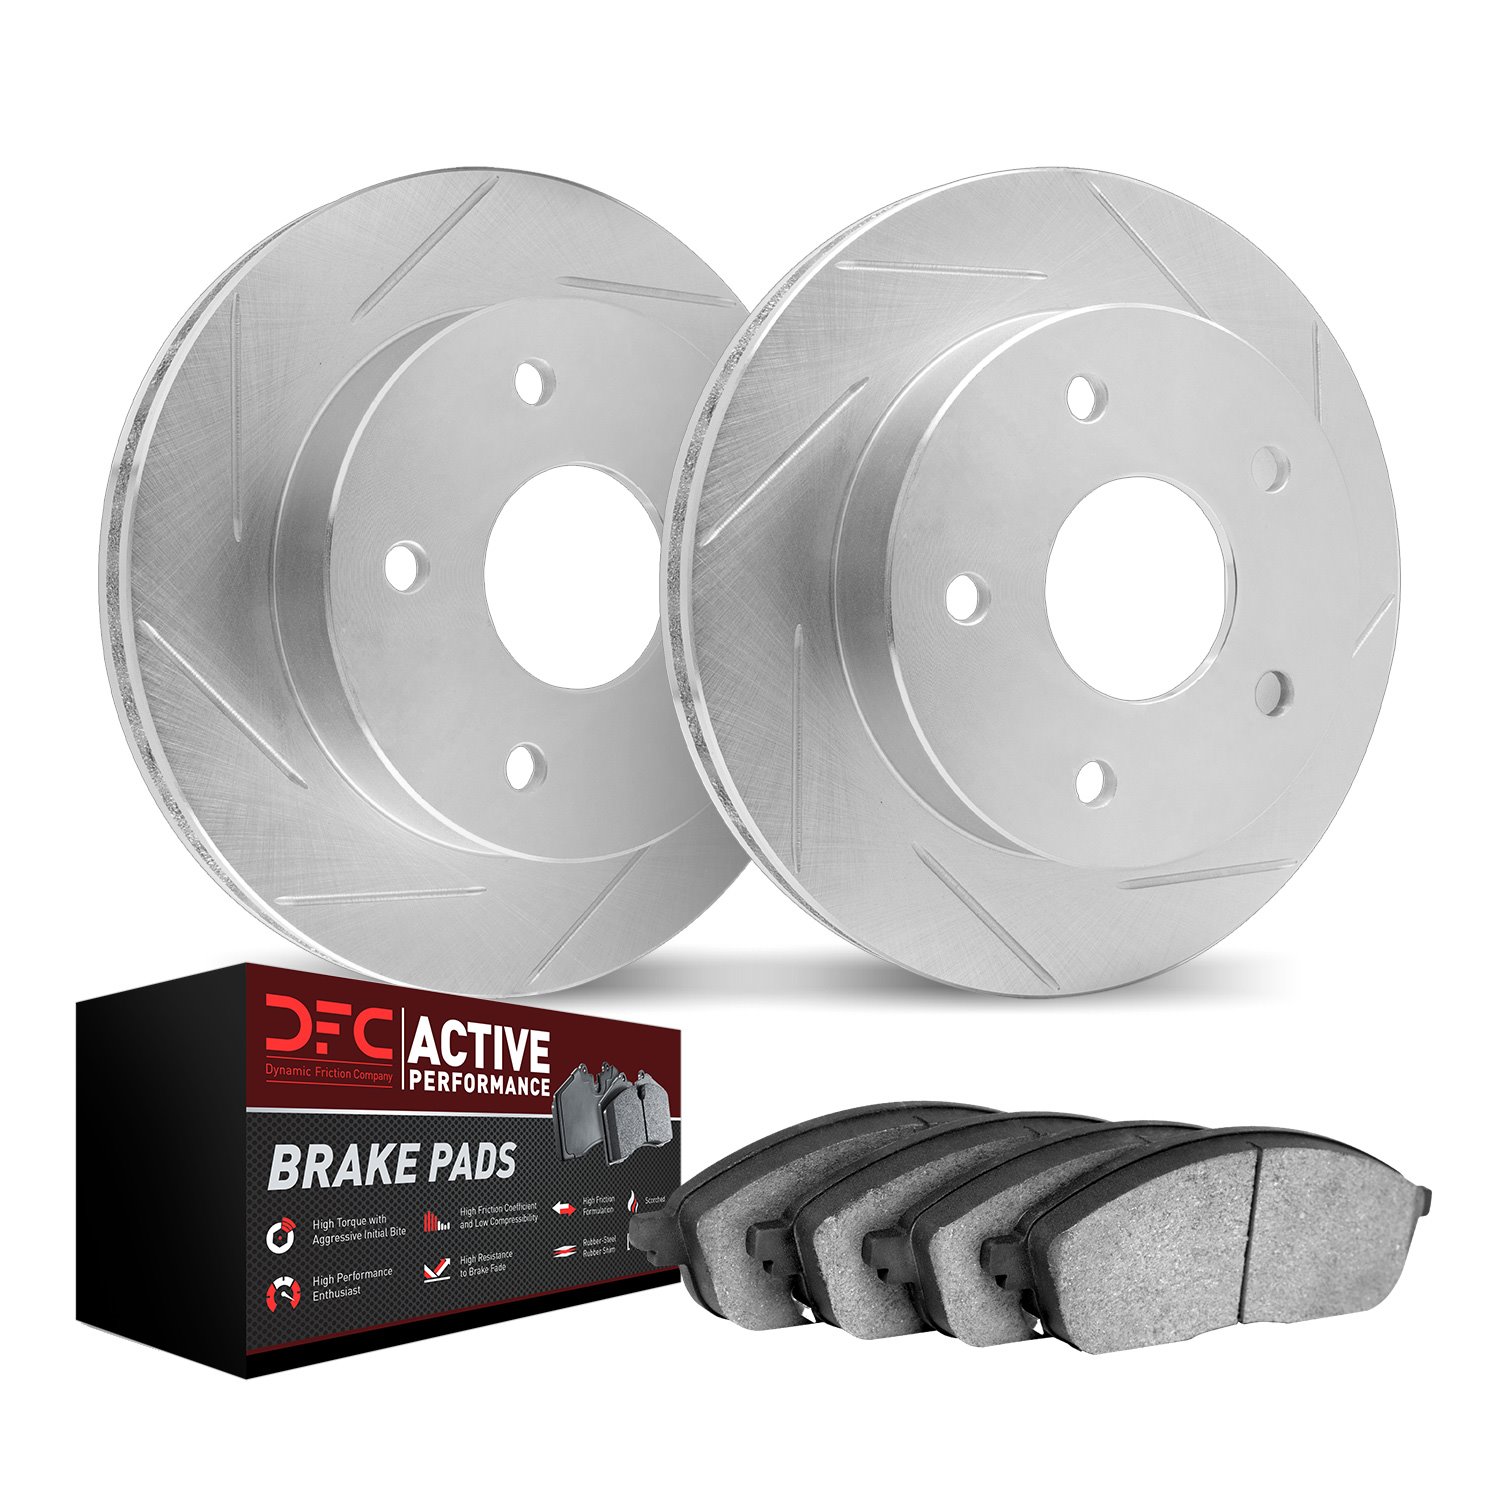 2702-02021 Geoperformance Slotted Brake Rotors with Active Performance Pads Kits, 1984-1989 Porsche, Position: Rear